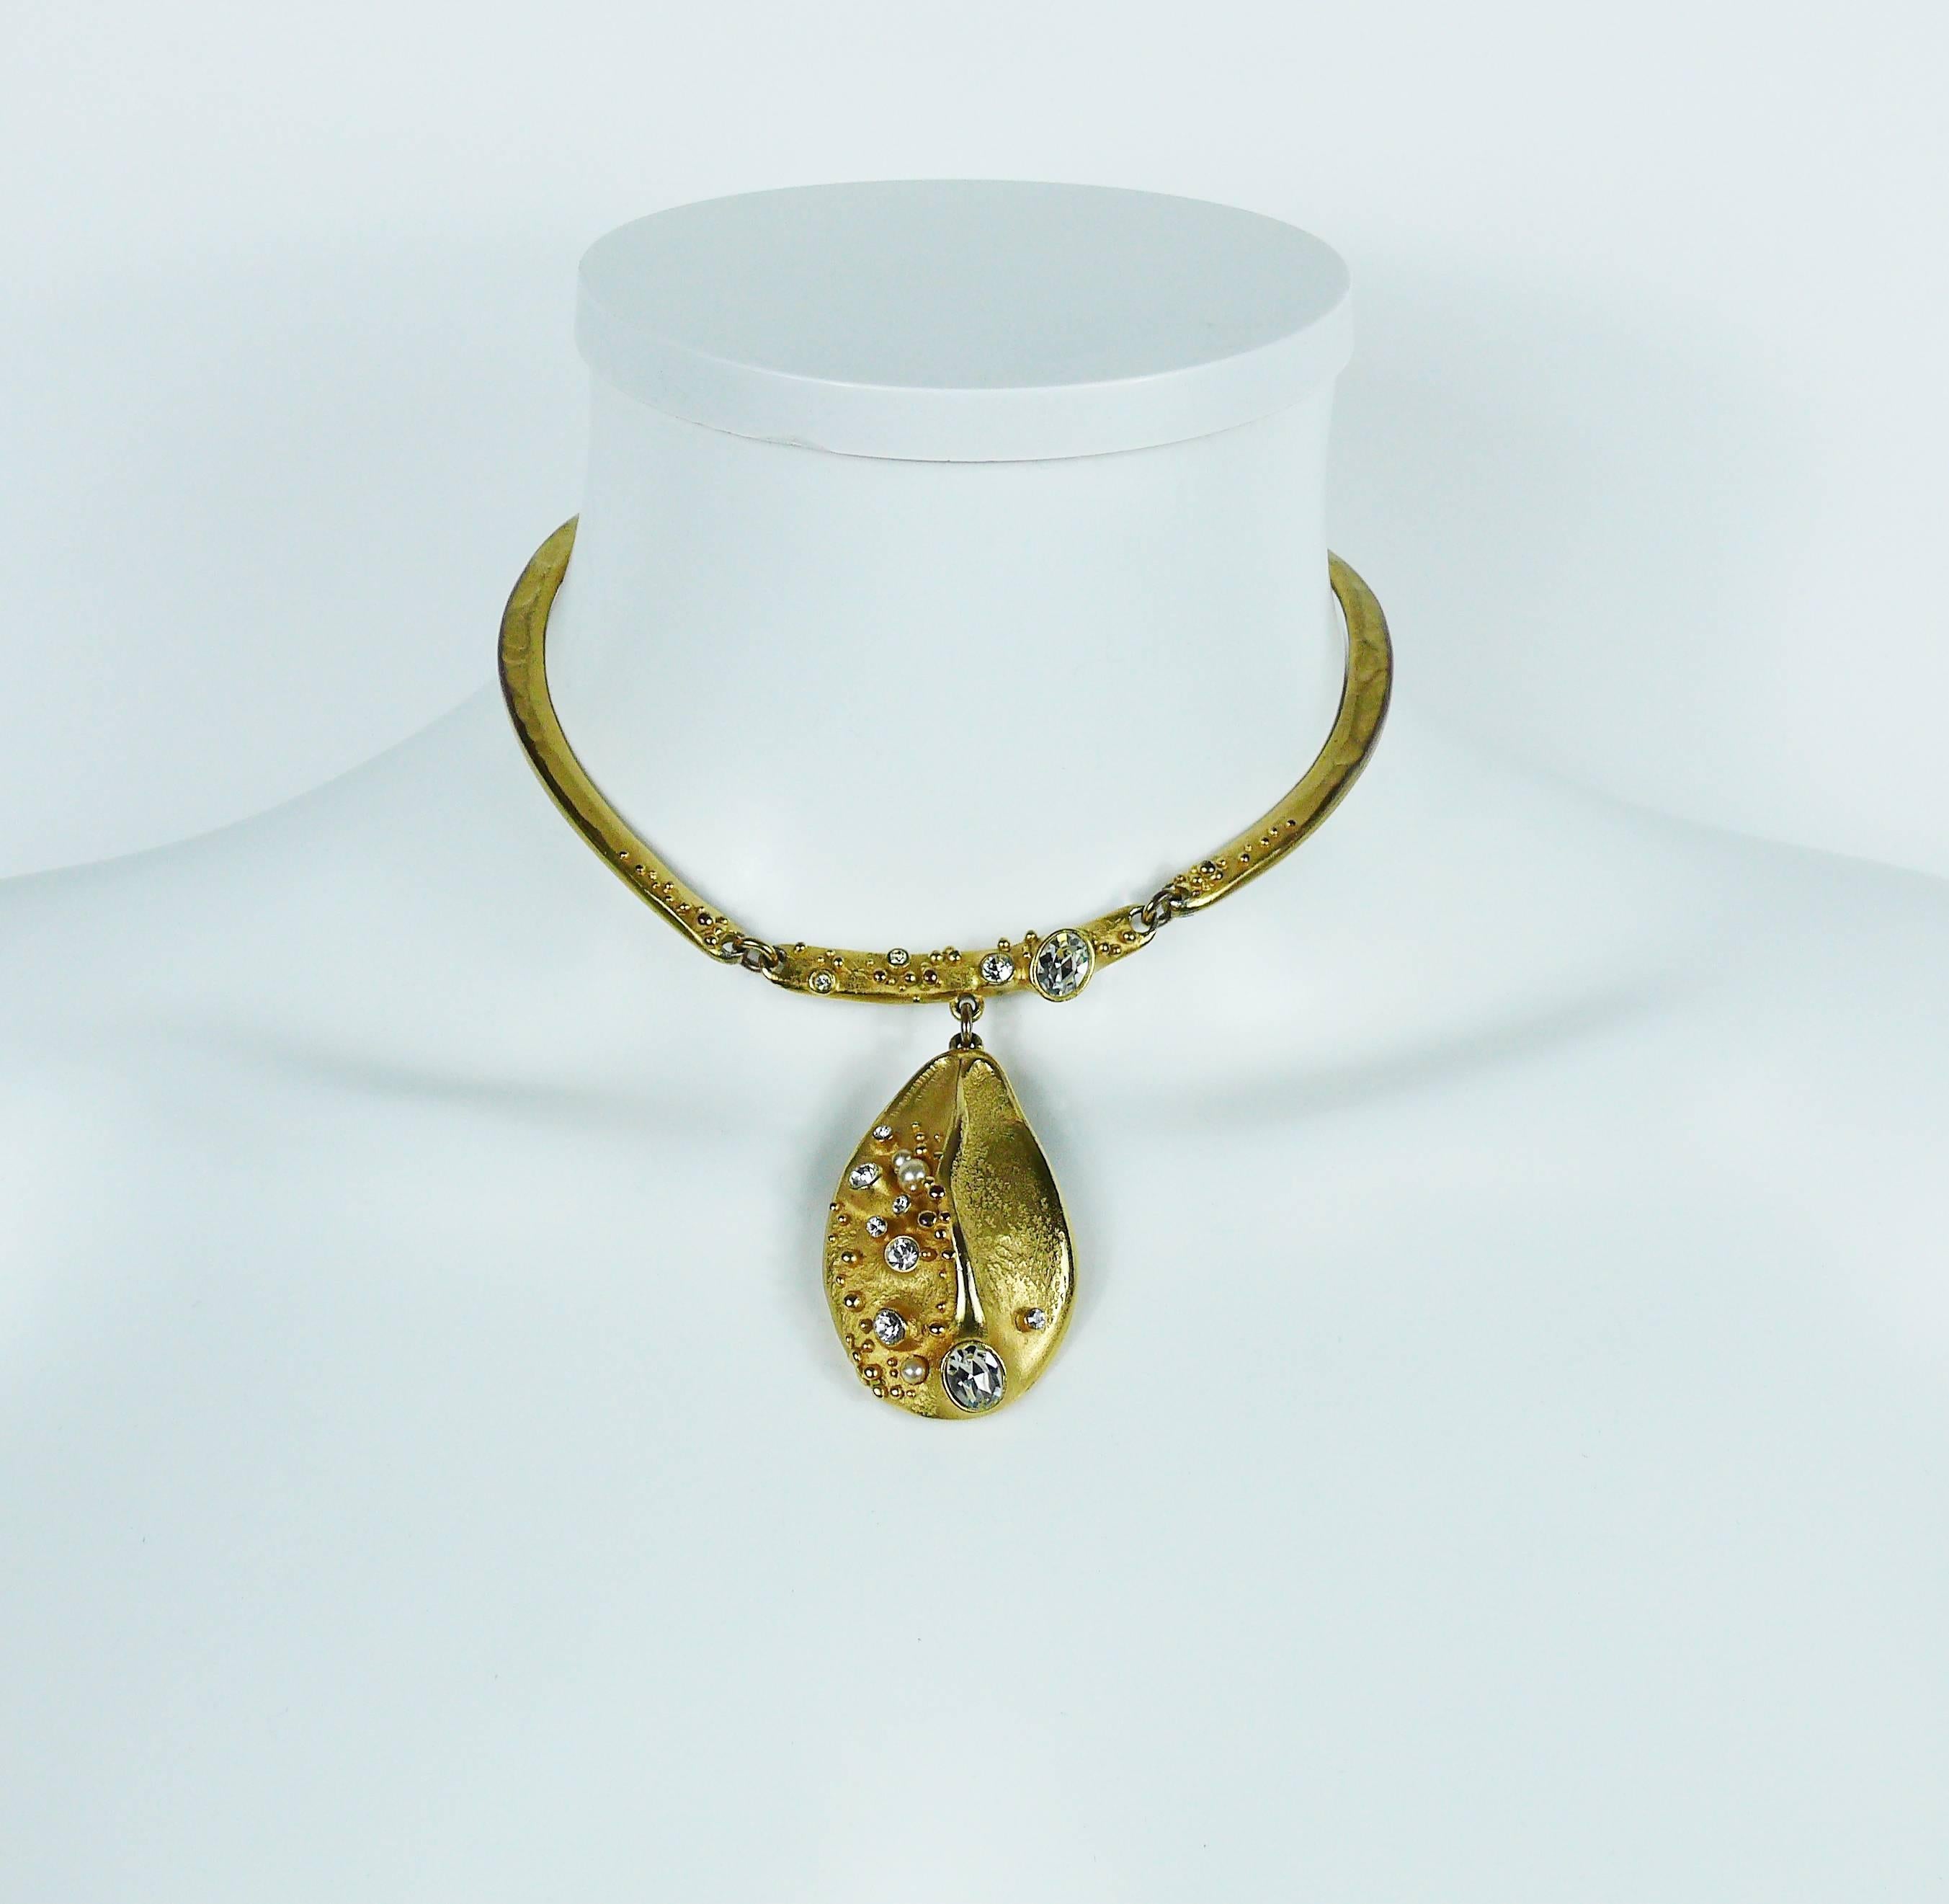 CHRISTIAN LACROIX vintage gold toned collar necklace featuring an abstract pendant with clear crystal and faux pearl embellishement.

Marked CHRISTIAN LACROIX CL Made in France.

T-bar closure.

Indicative measurements : inner circumference approx.